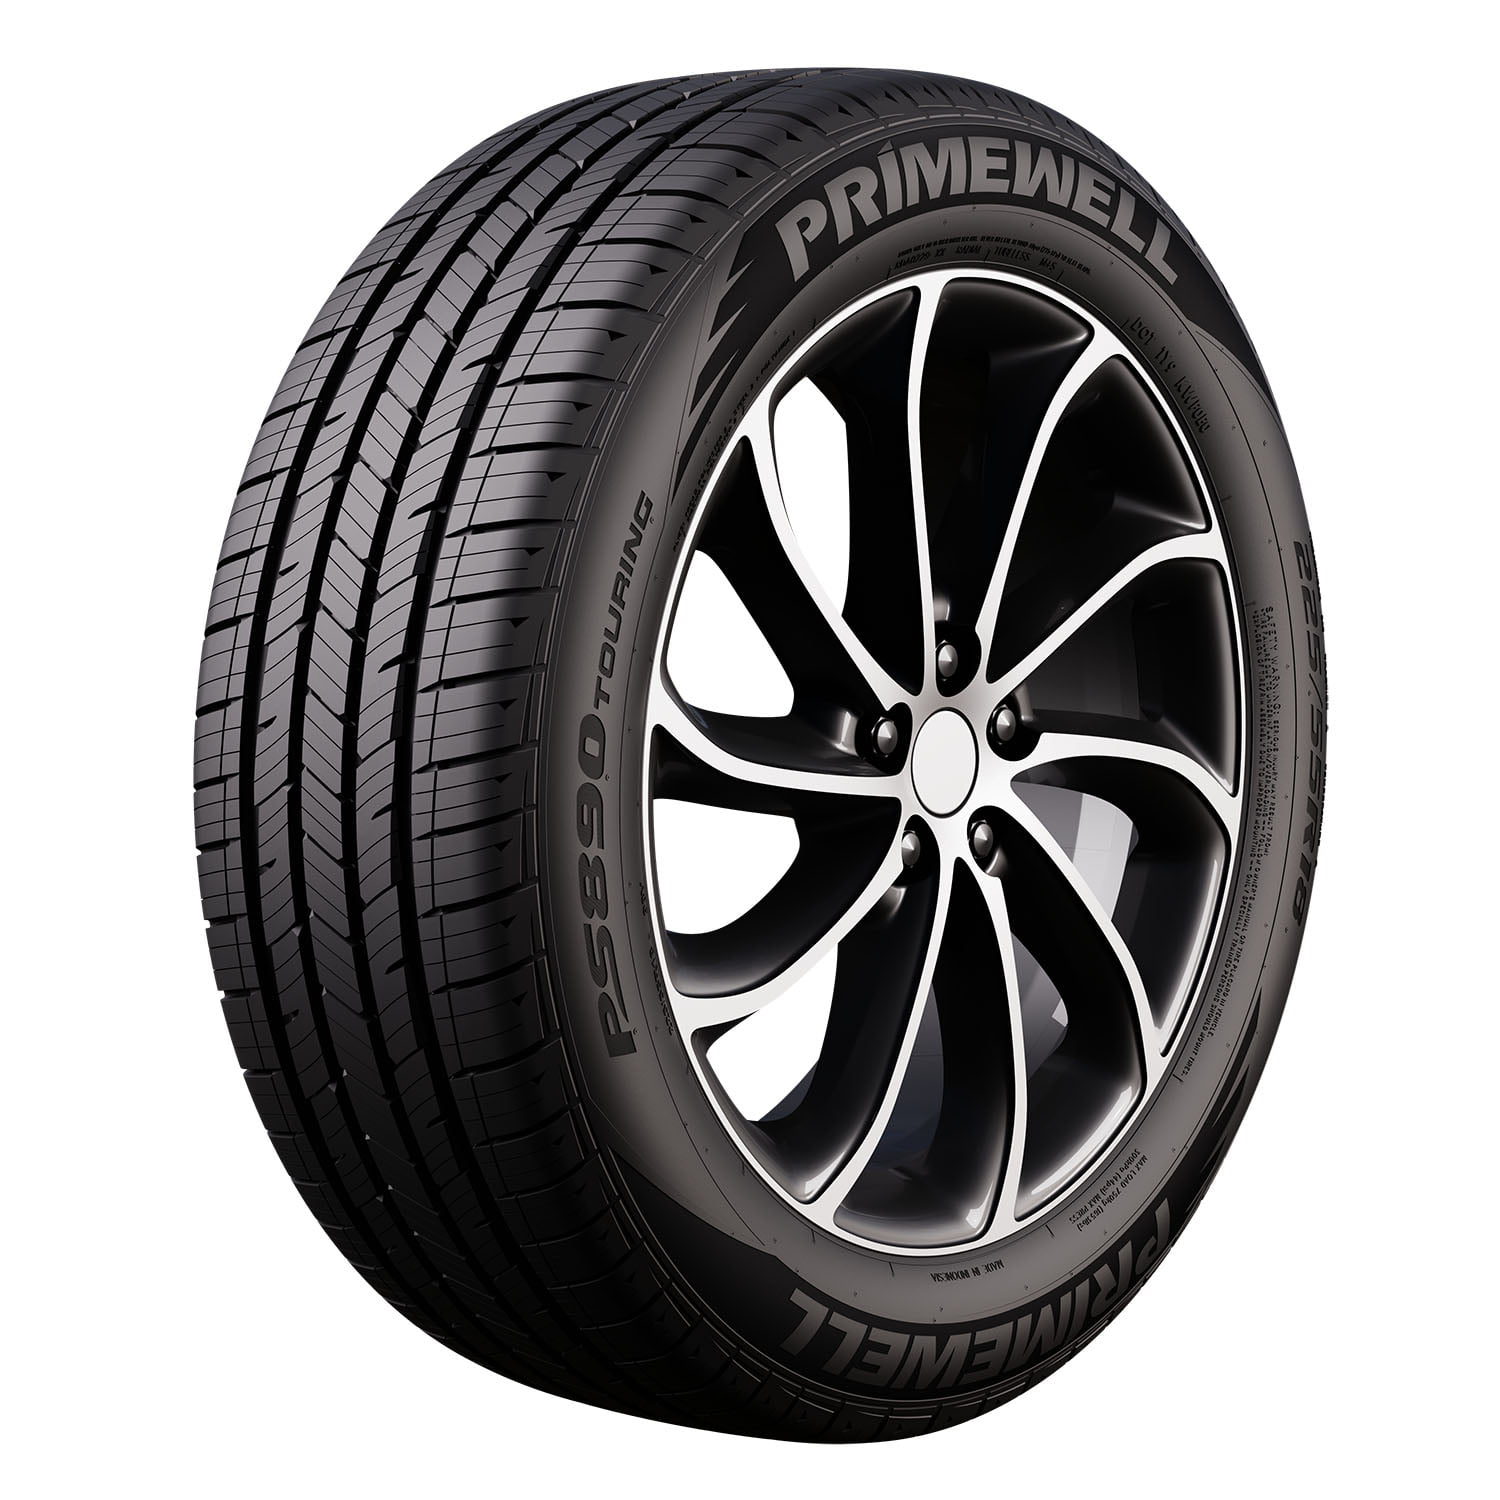 Primewell PS890 Touring All Season 235/65R17 104H Passenger Tire $93.17